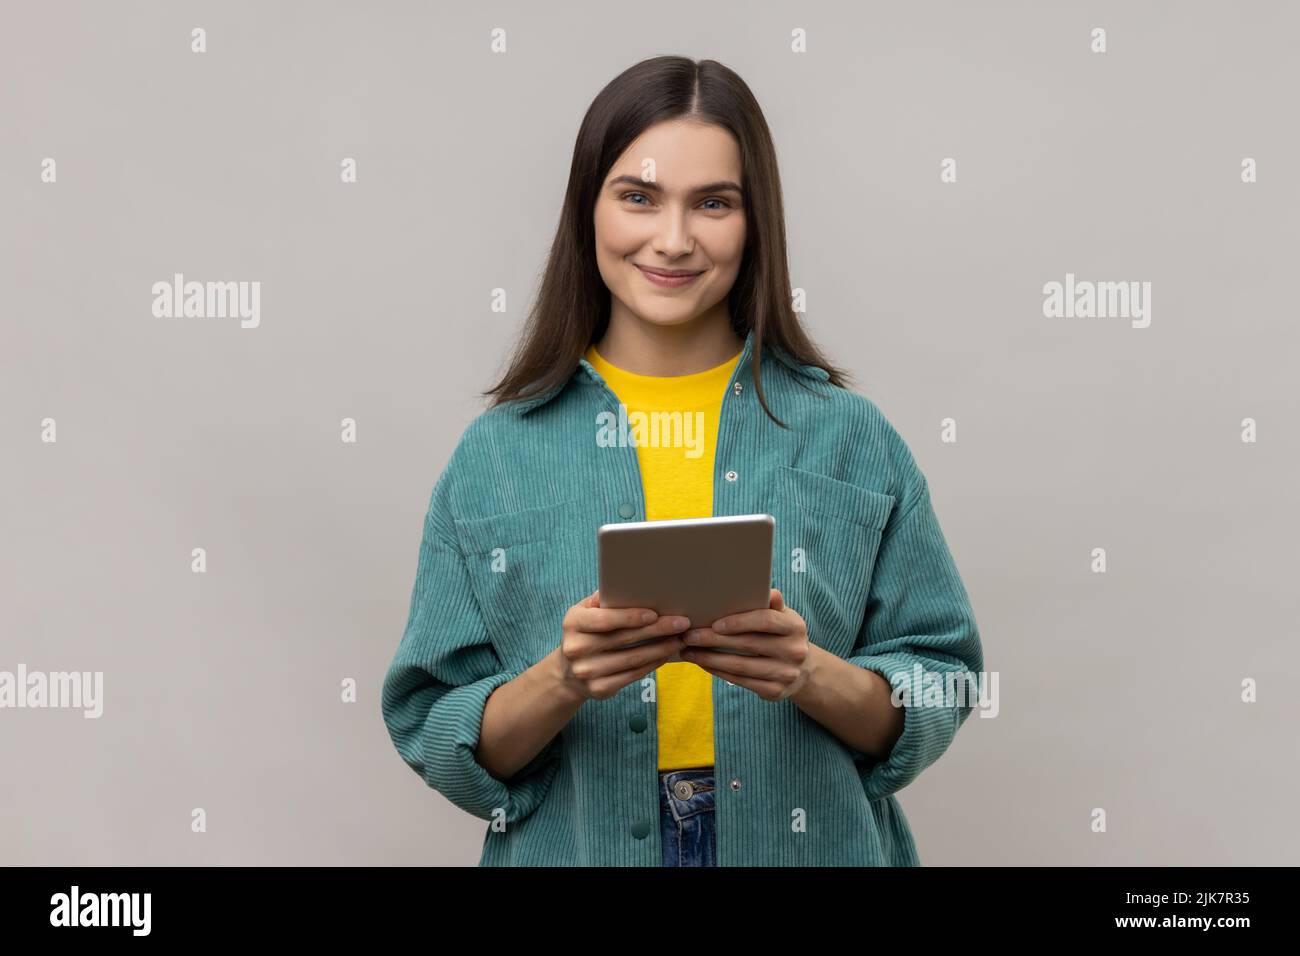 Woman with dark hair working online, using tablet for checking social networks, looking at camera with positive expression, wearing casual style jacket. Indoor studio shot isolated on gray background. Stock Photo